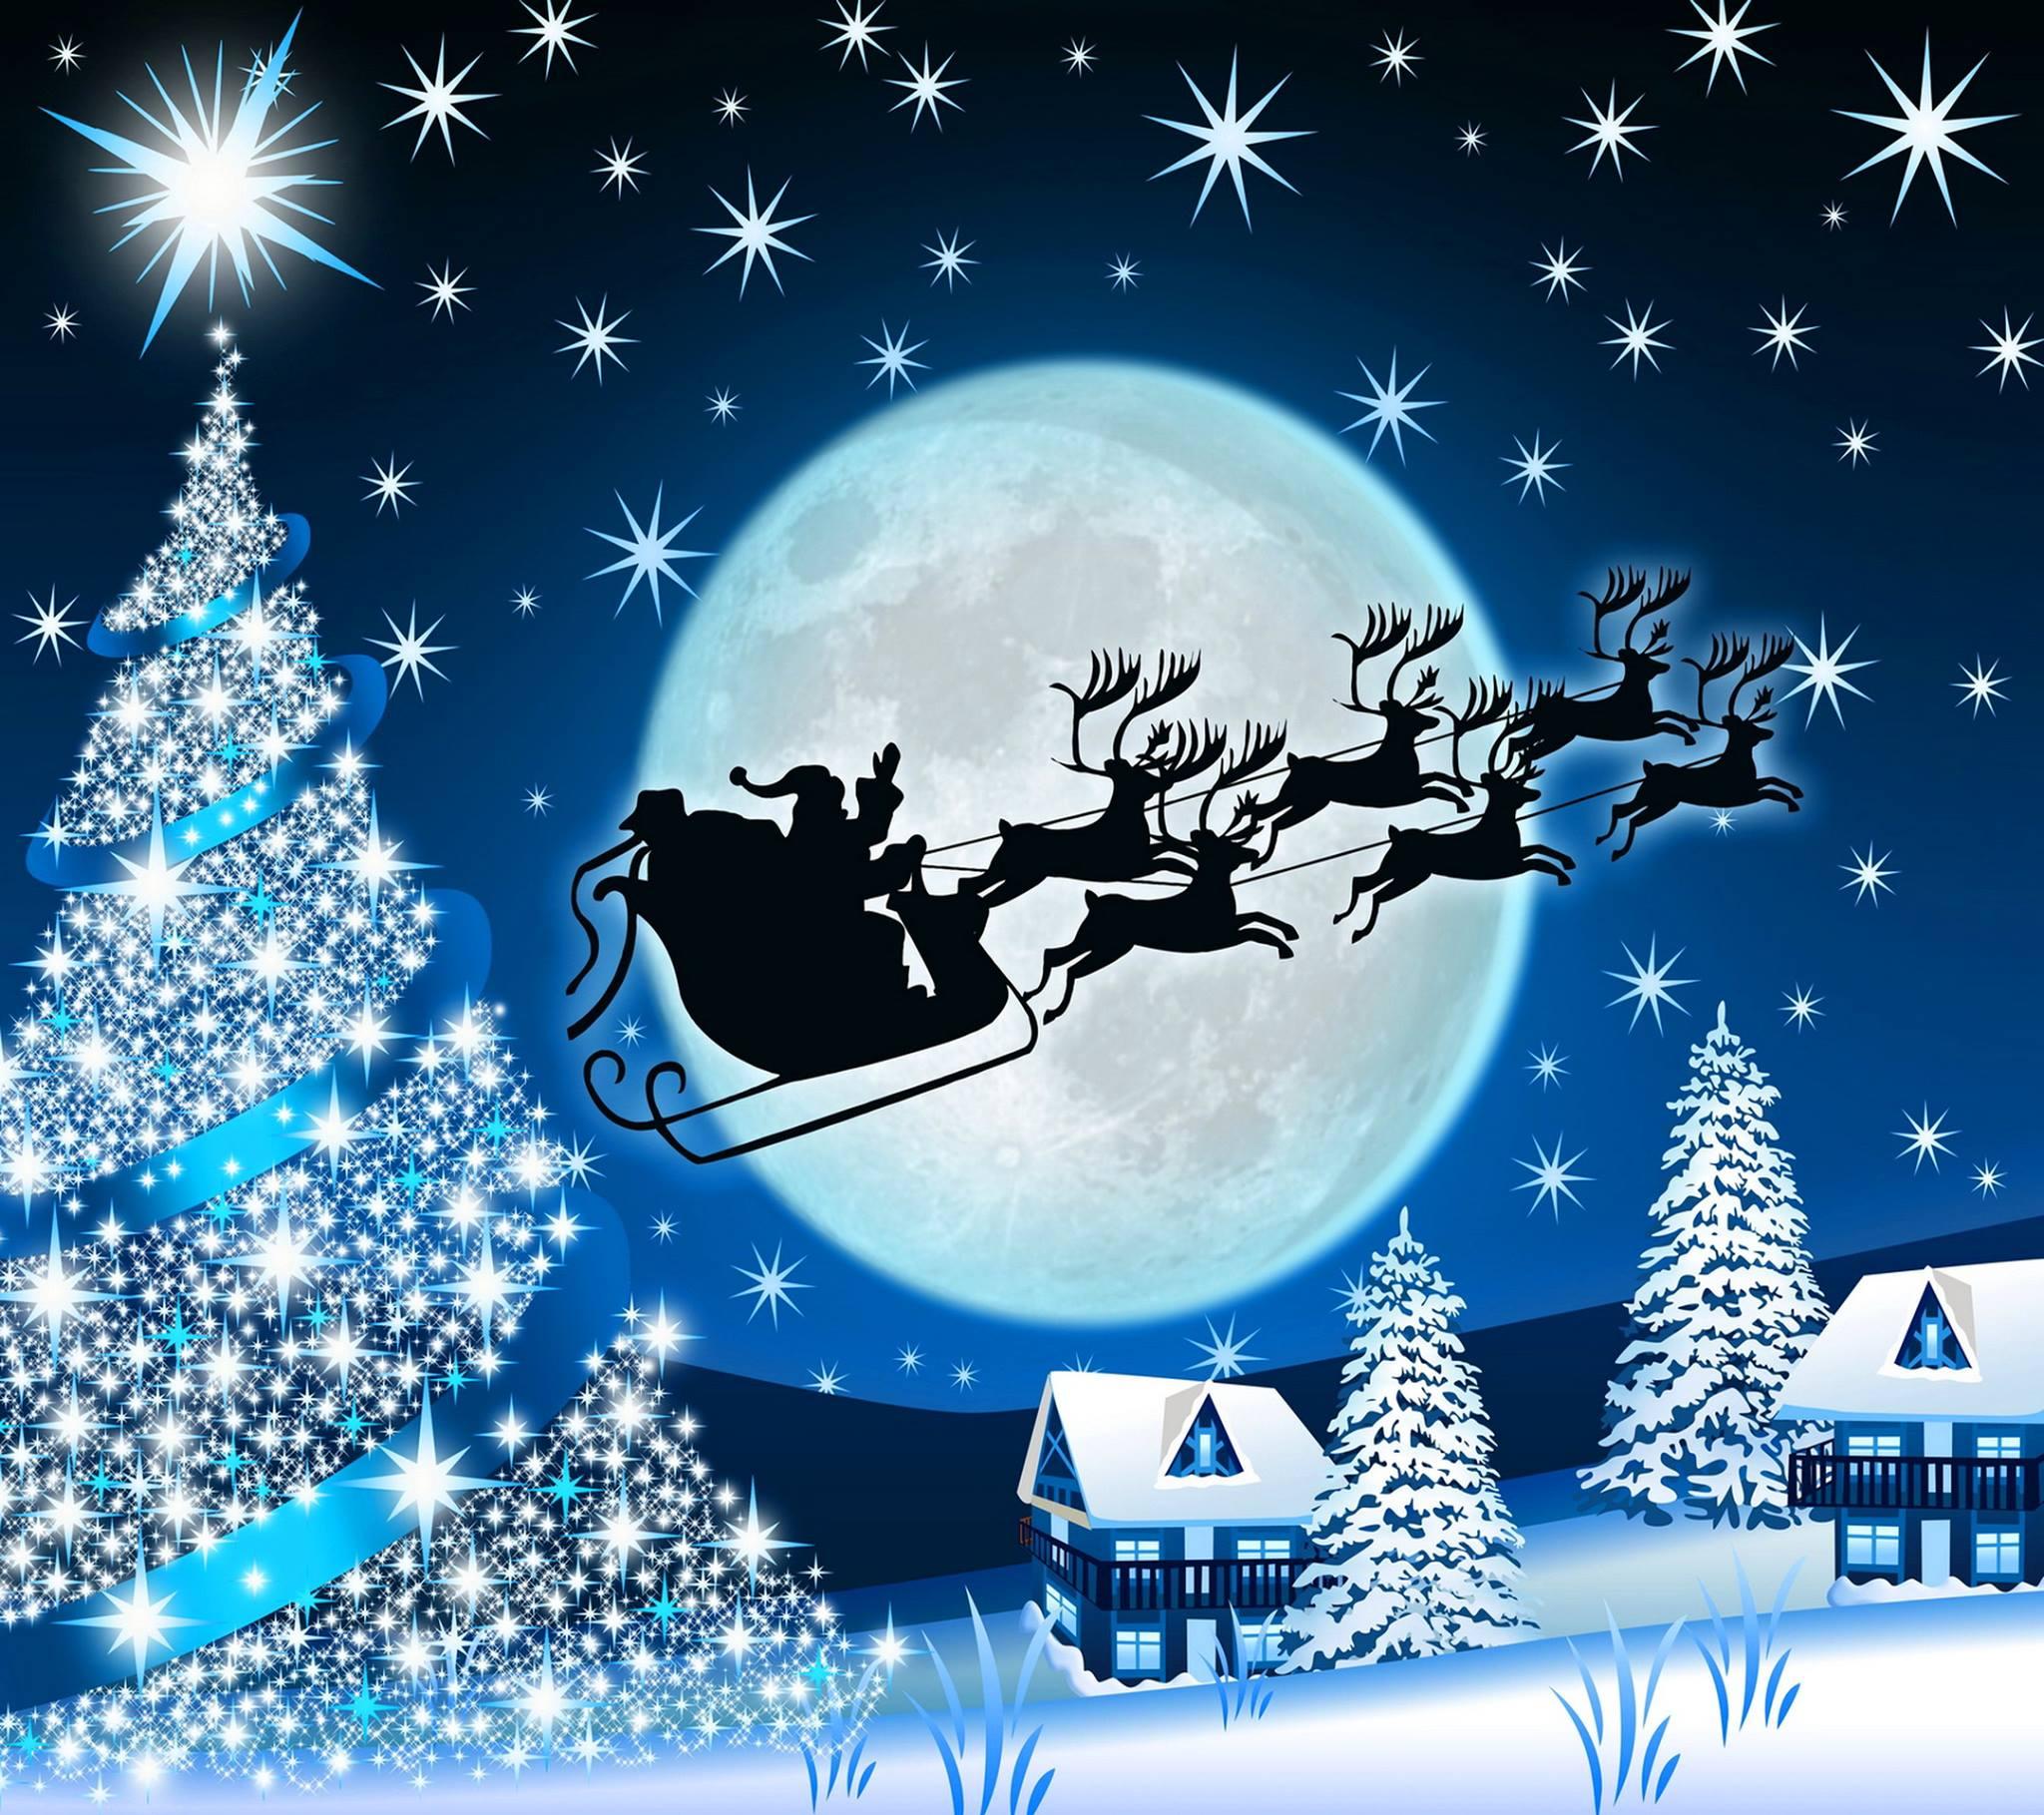 Christmas Wallpaper Santa Clause is coming to town merry